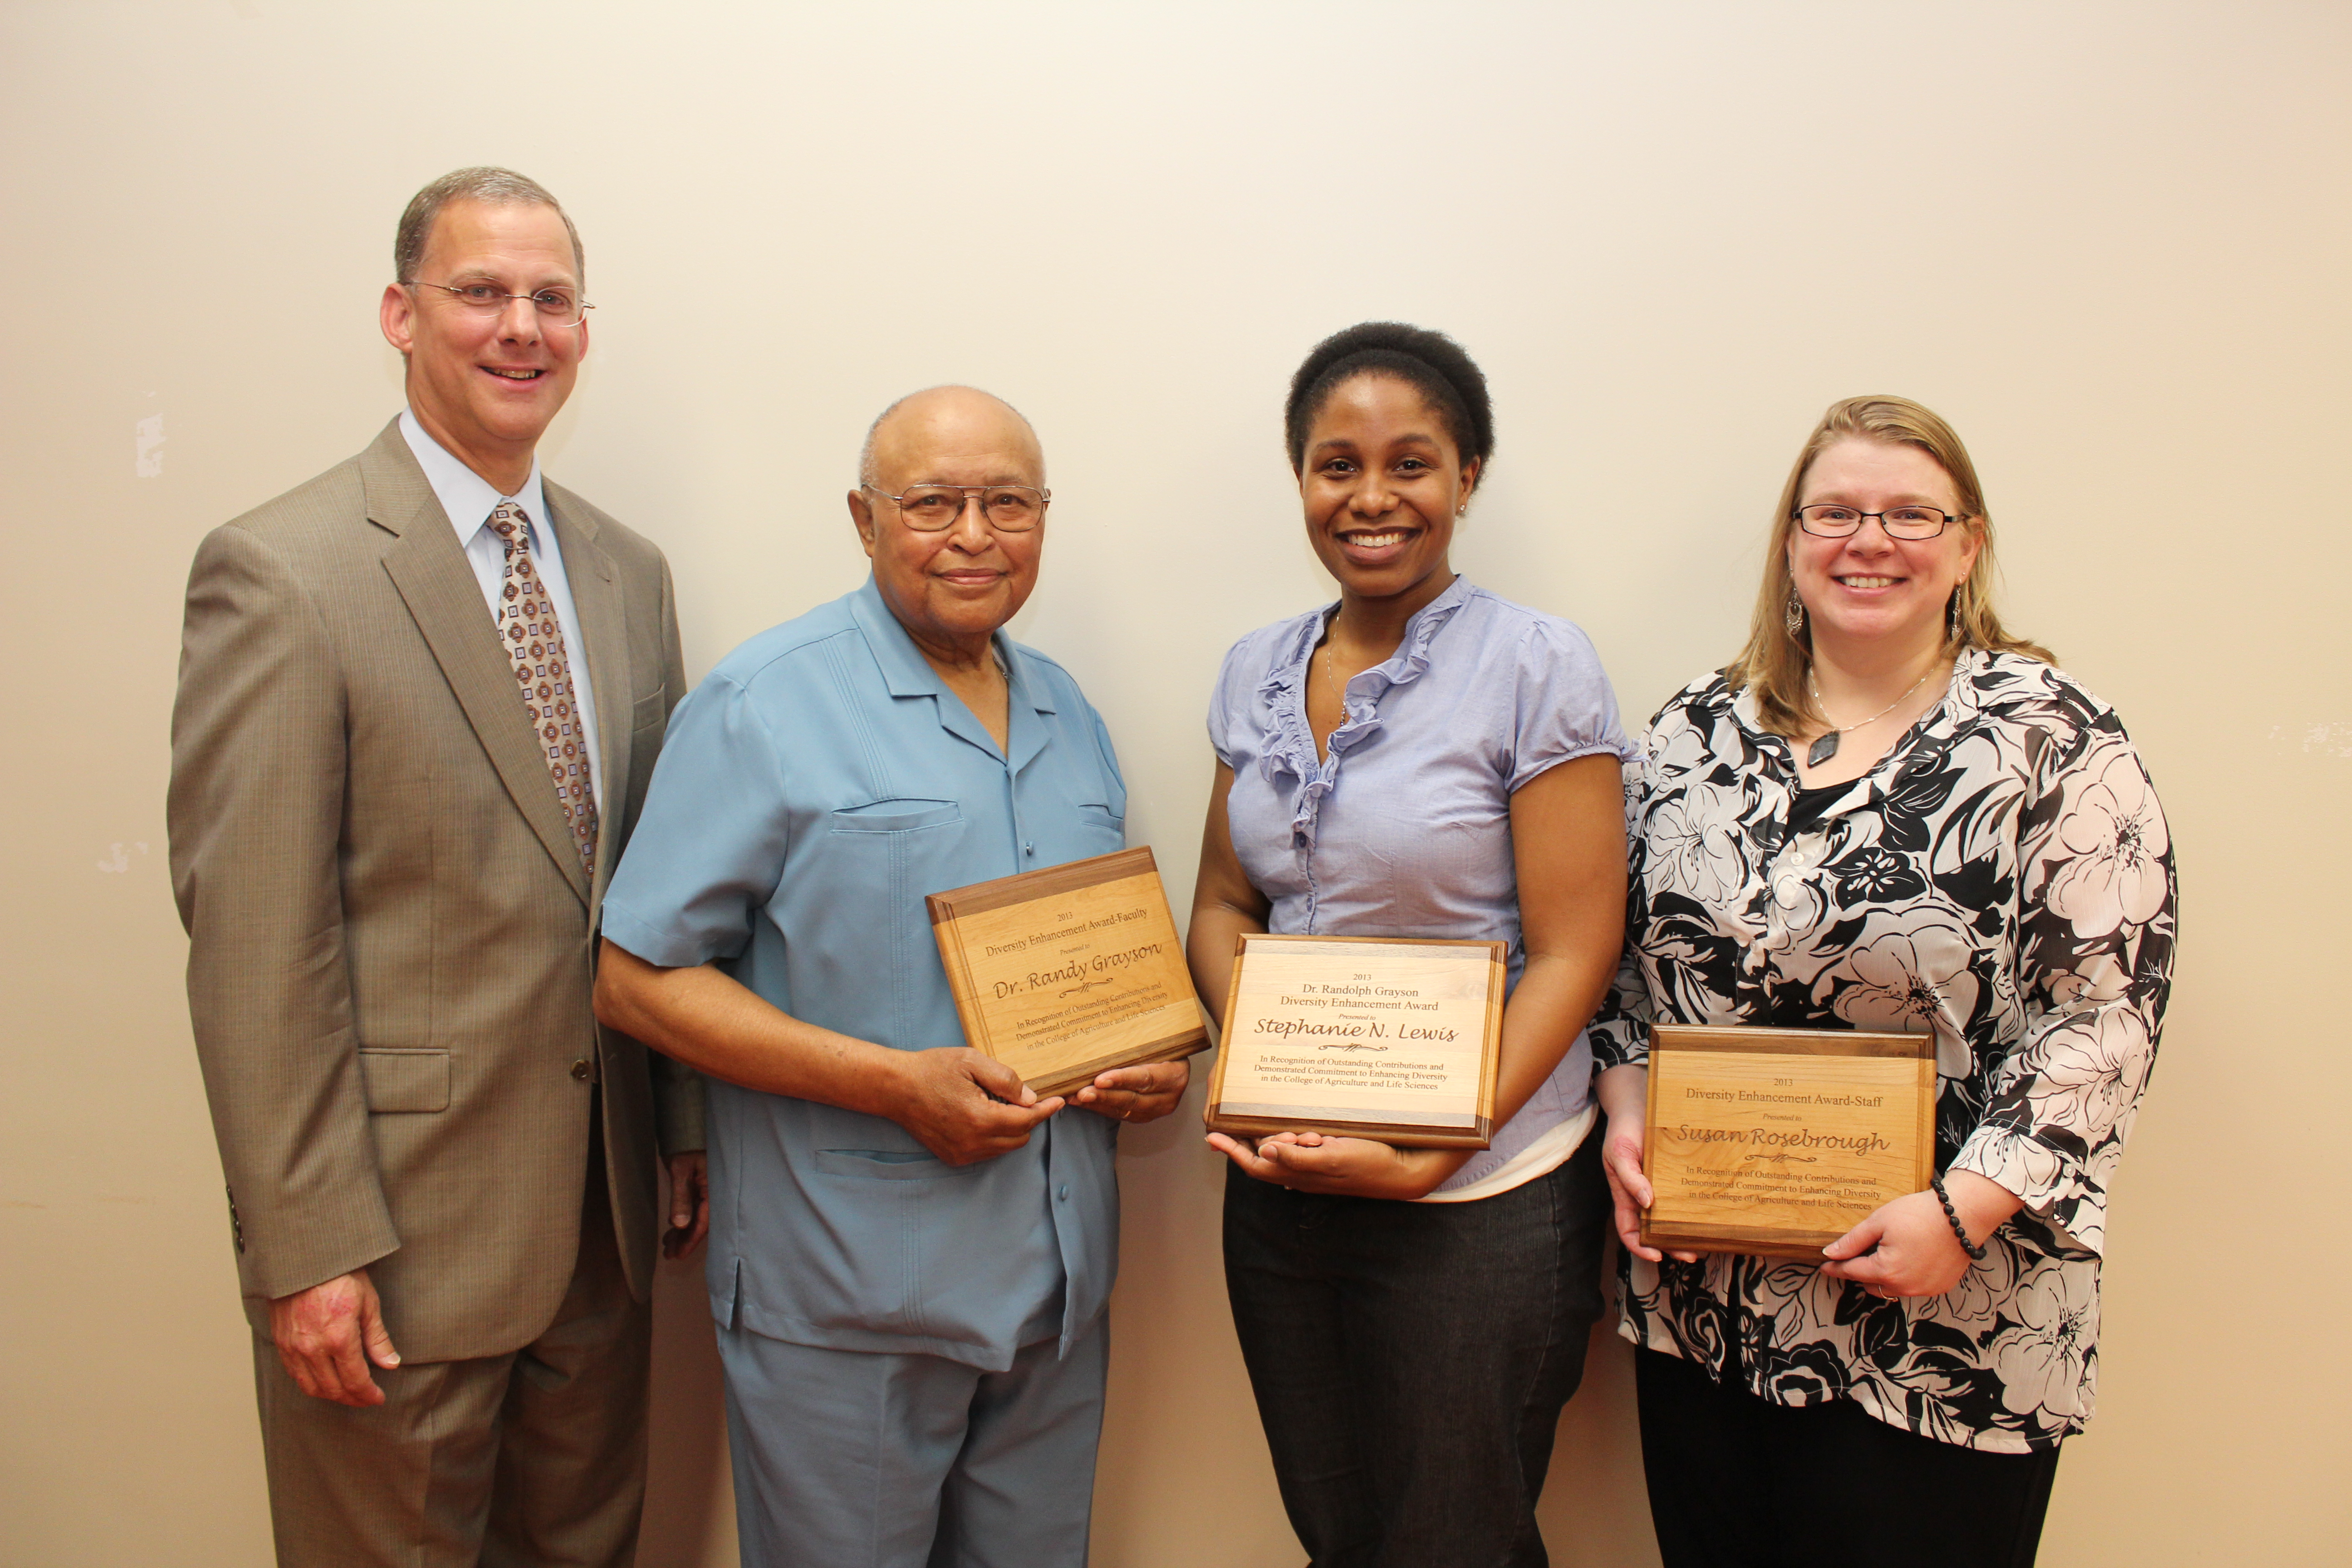 College of Agriculture and Life Sciences Dean Alan Grant stands next to three recipients of the college’s Diversity Enhancement Award: Professor Emeritus Randolph Grayson, graduate student Stephanie “Nikki” Lewis, and staff member Susan Rosebrough.